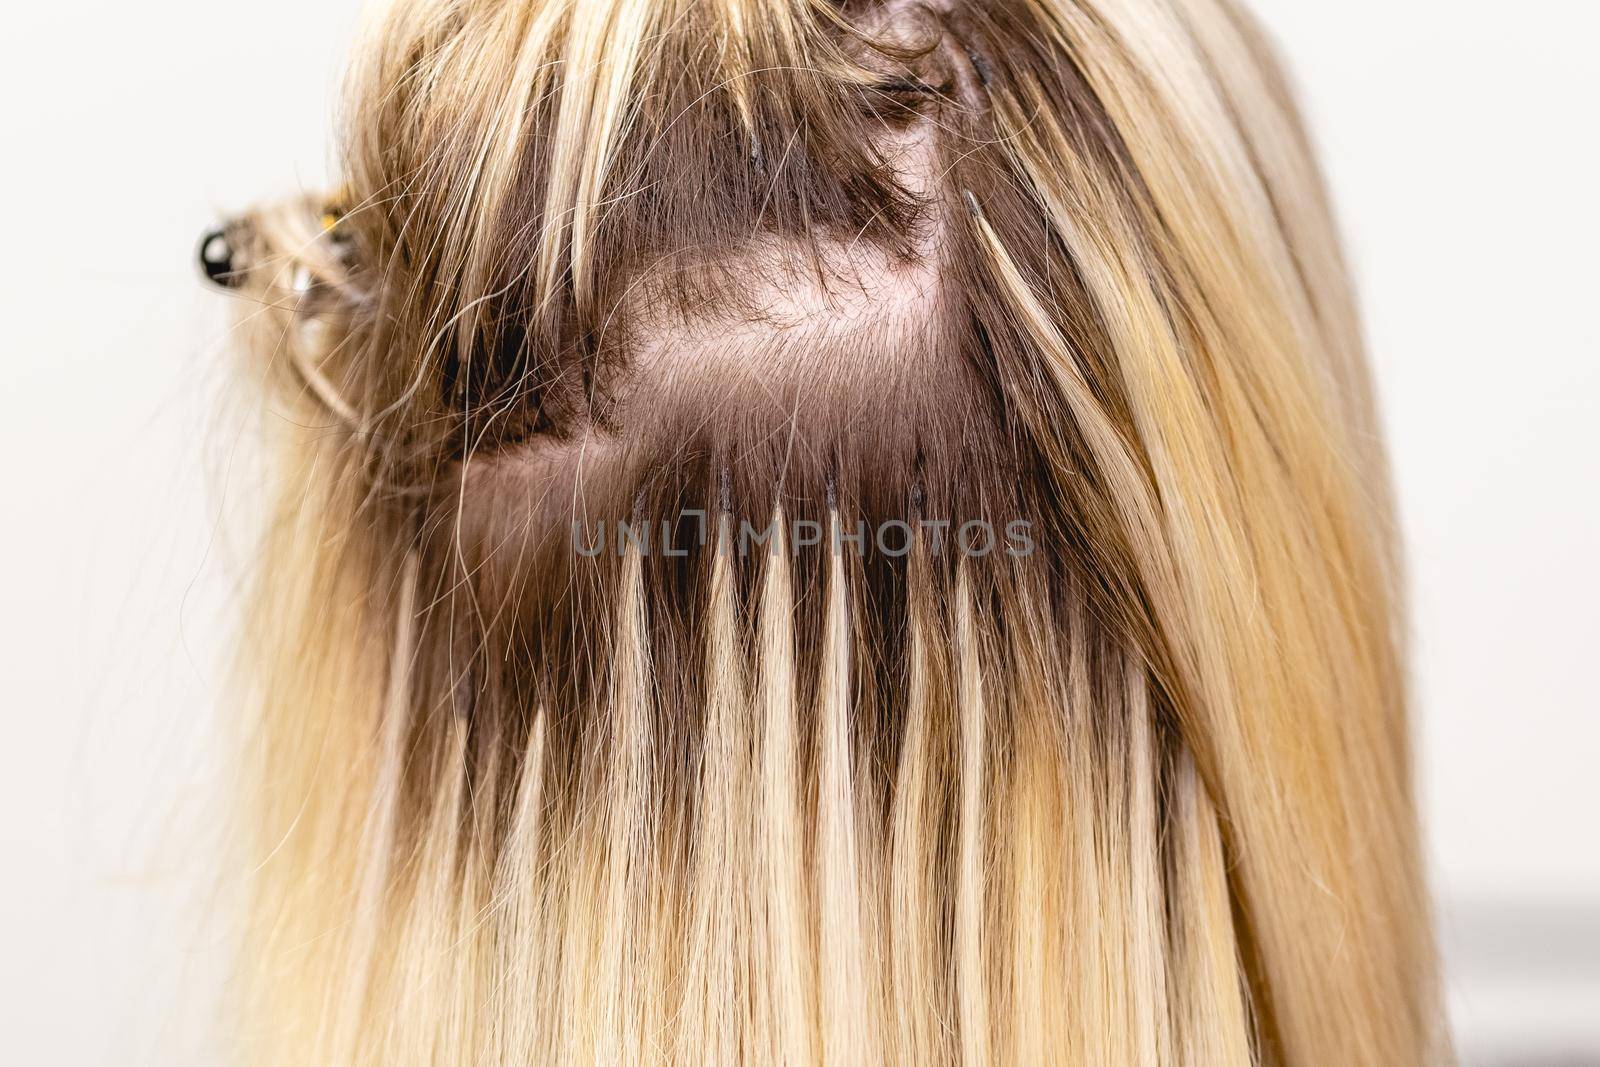 Blonde hair extensions procedure in beauty salon by Syvanych